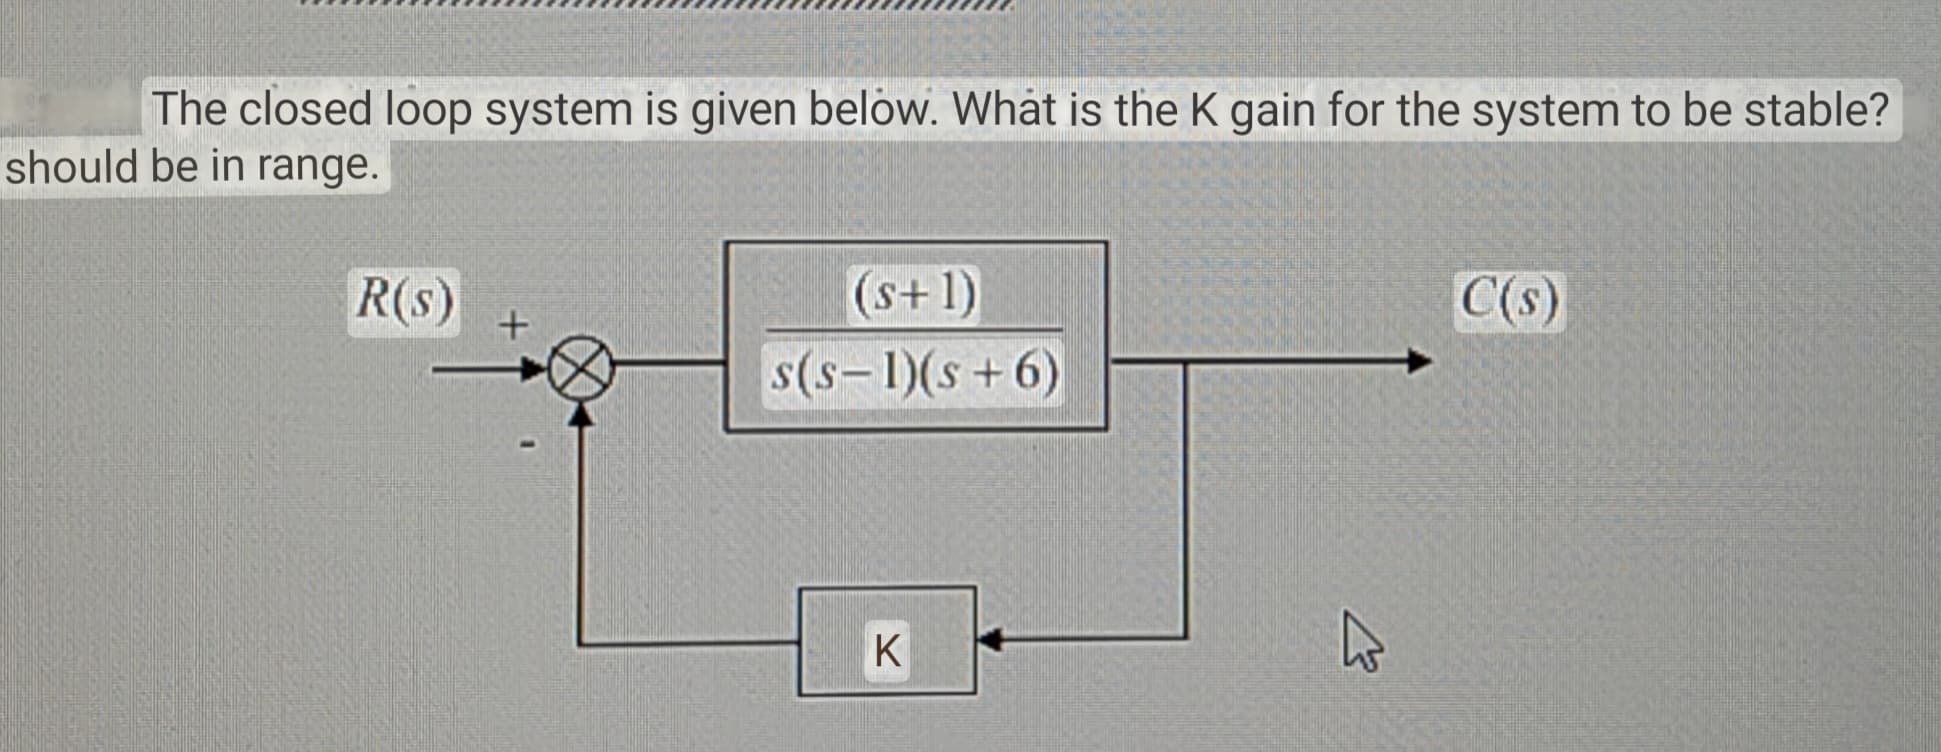 The closed loop system is given below. What is the K gain for the system to be stable?
should be in range.
R(s)
+
(s+1)
s(S-1)(s+6)
K
K
C(s)